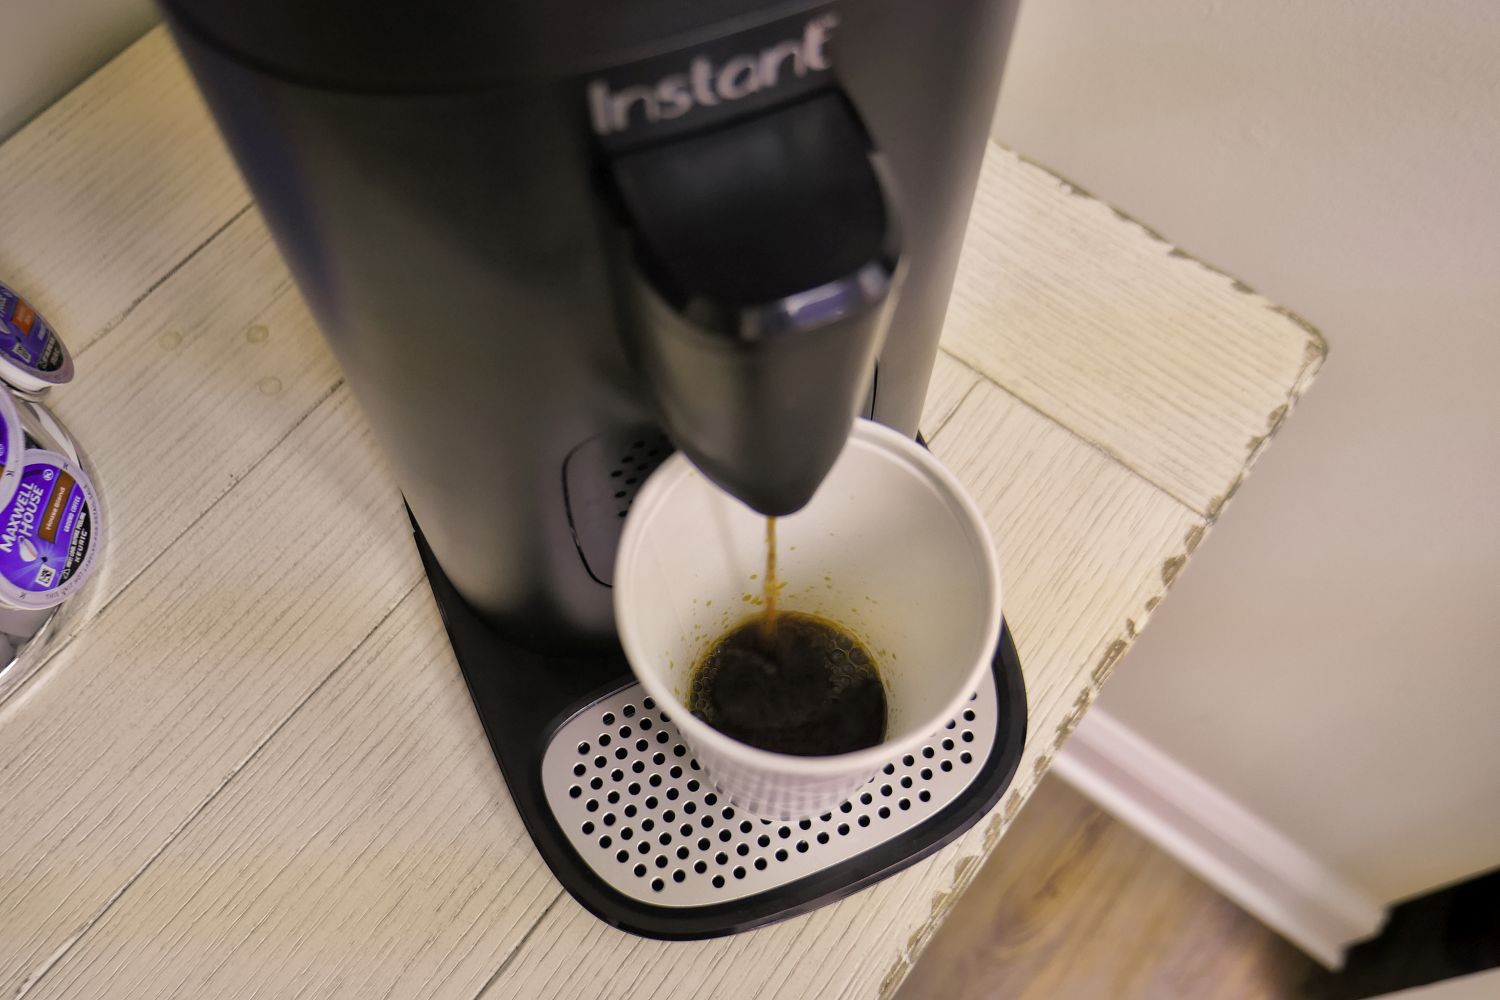 Instant Pot has launched a coffee/espresso maker, the Instant Pod